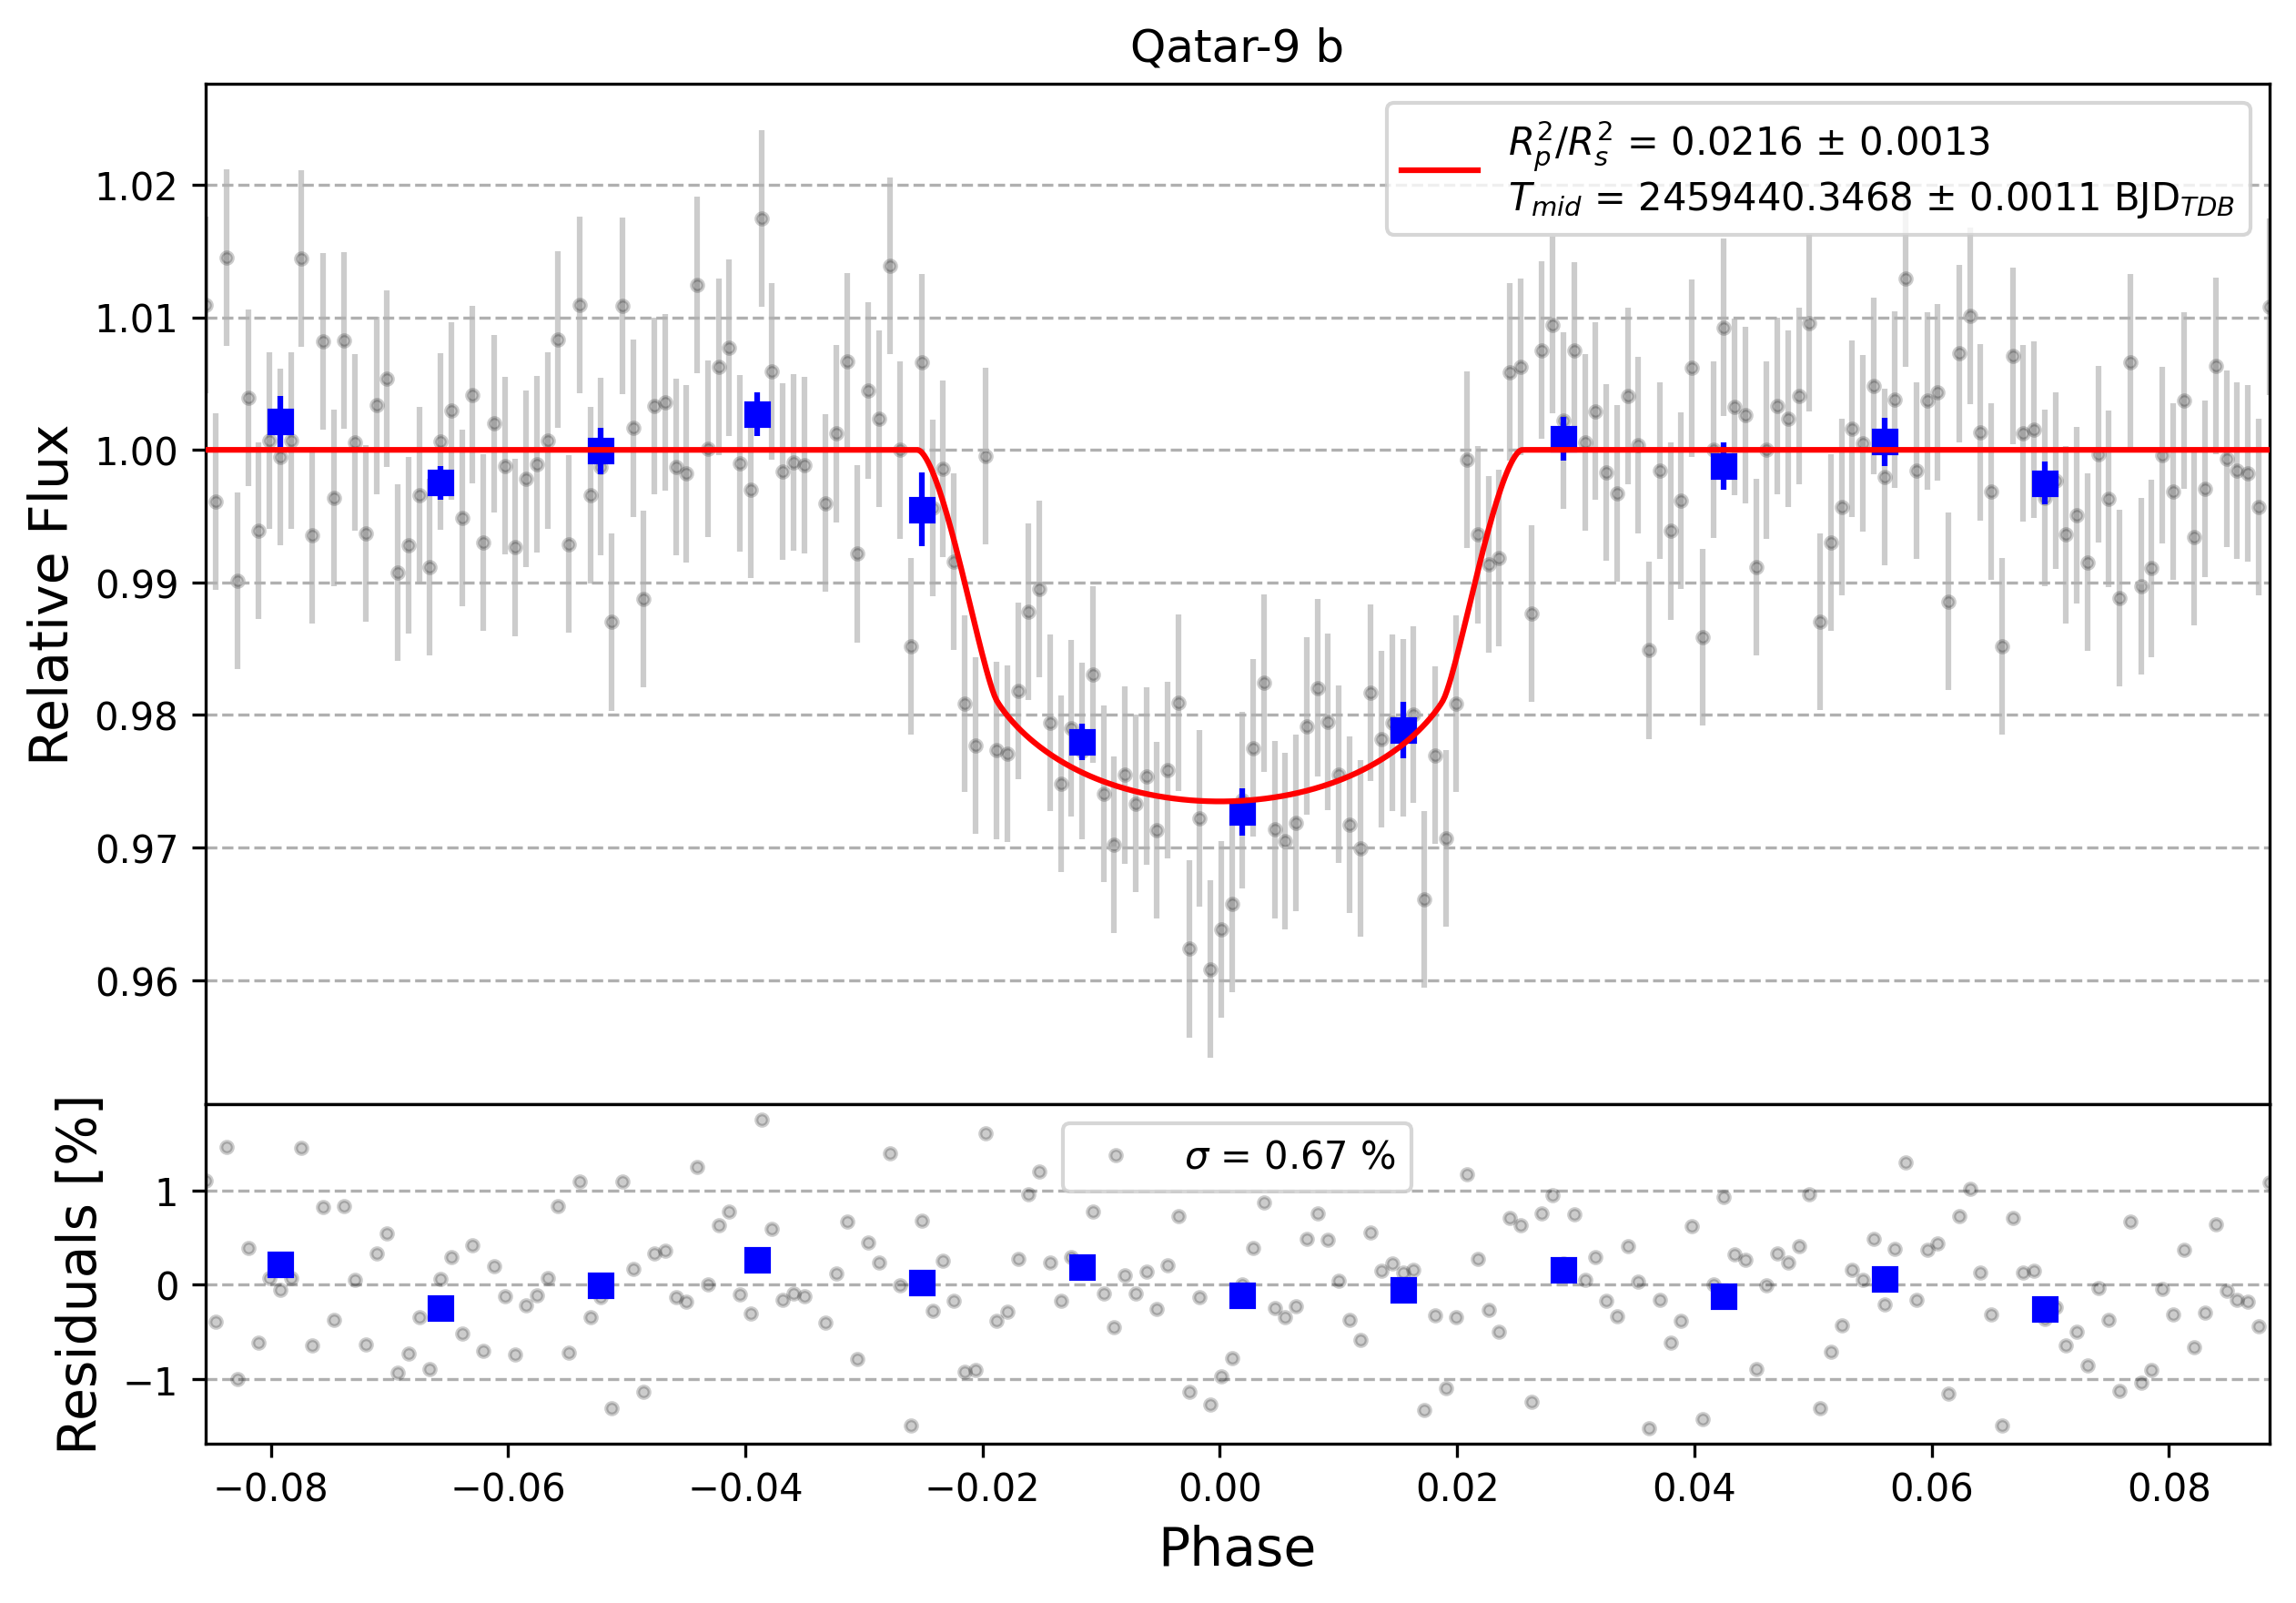 Light curve chart for 528f4c0fac3879729aa3a4c64ade89a7